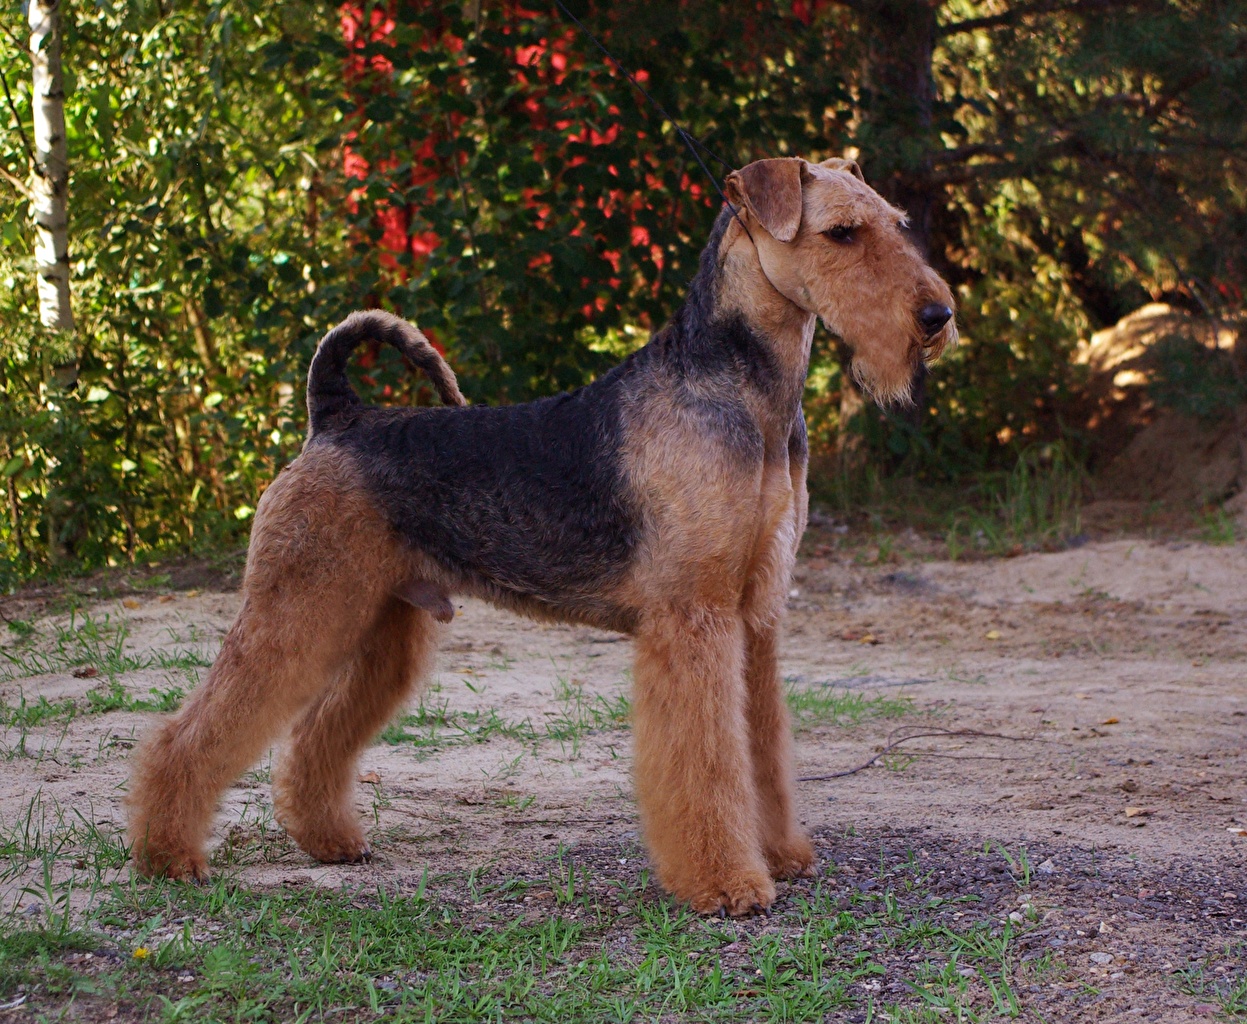 Wallpaper Airedale Terrier Dogs Animal